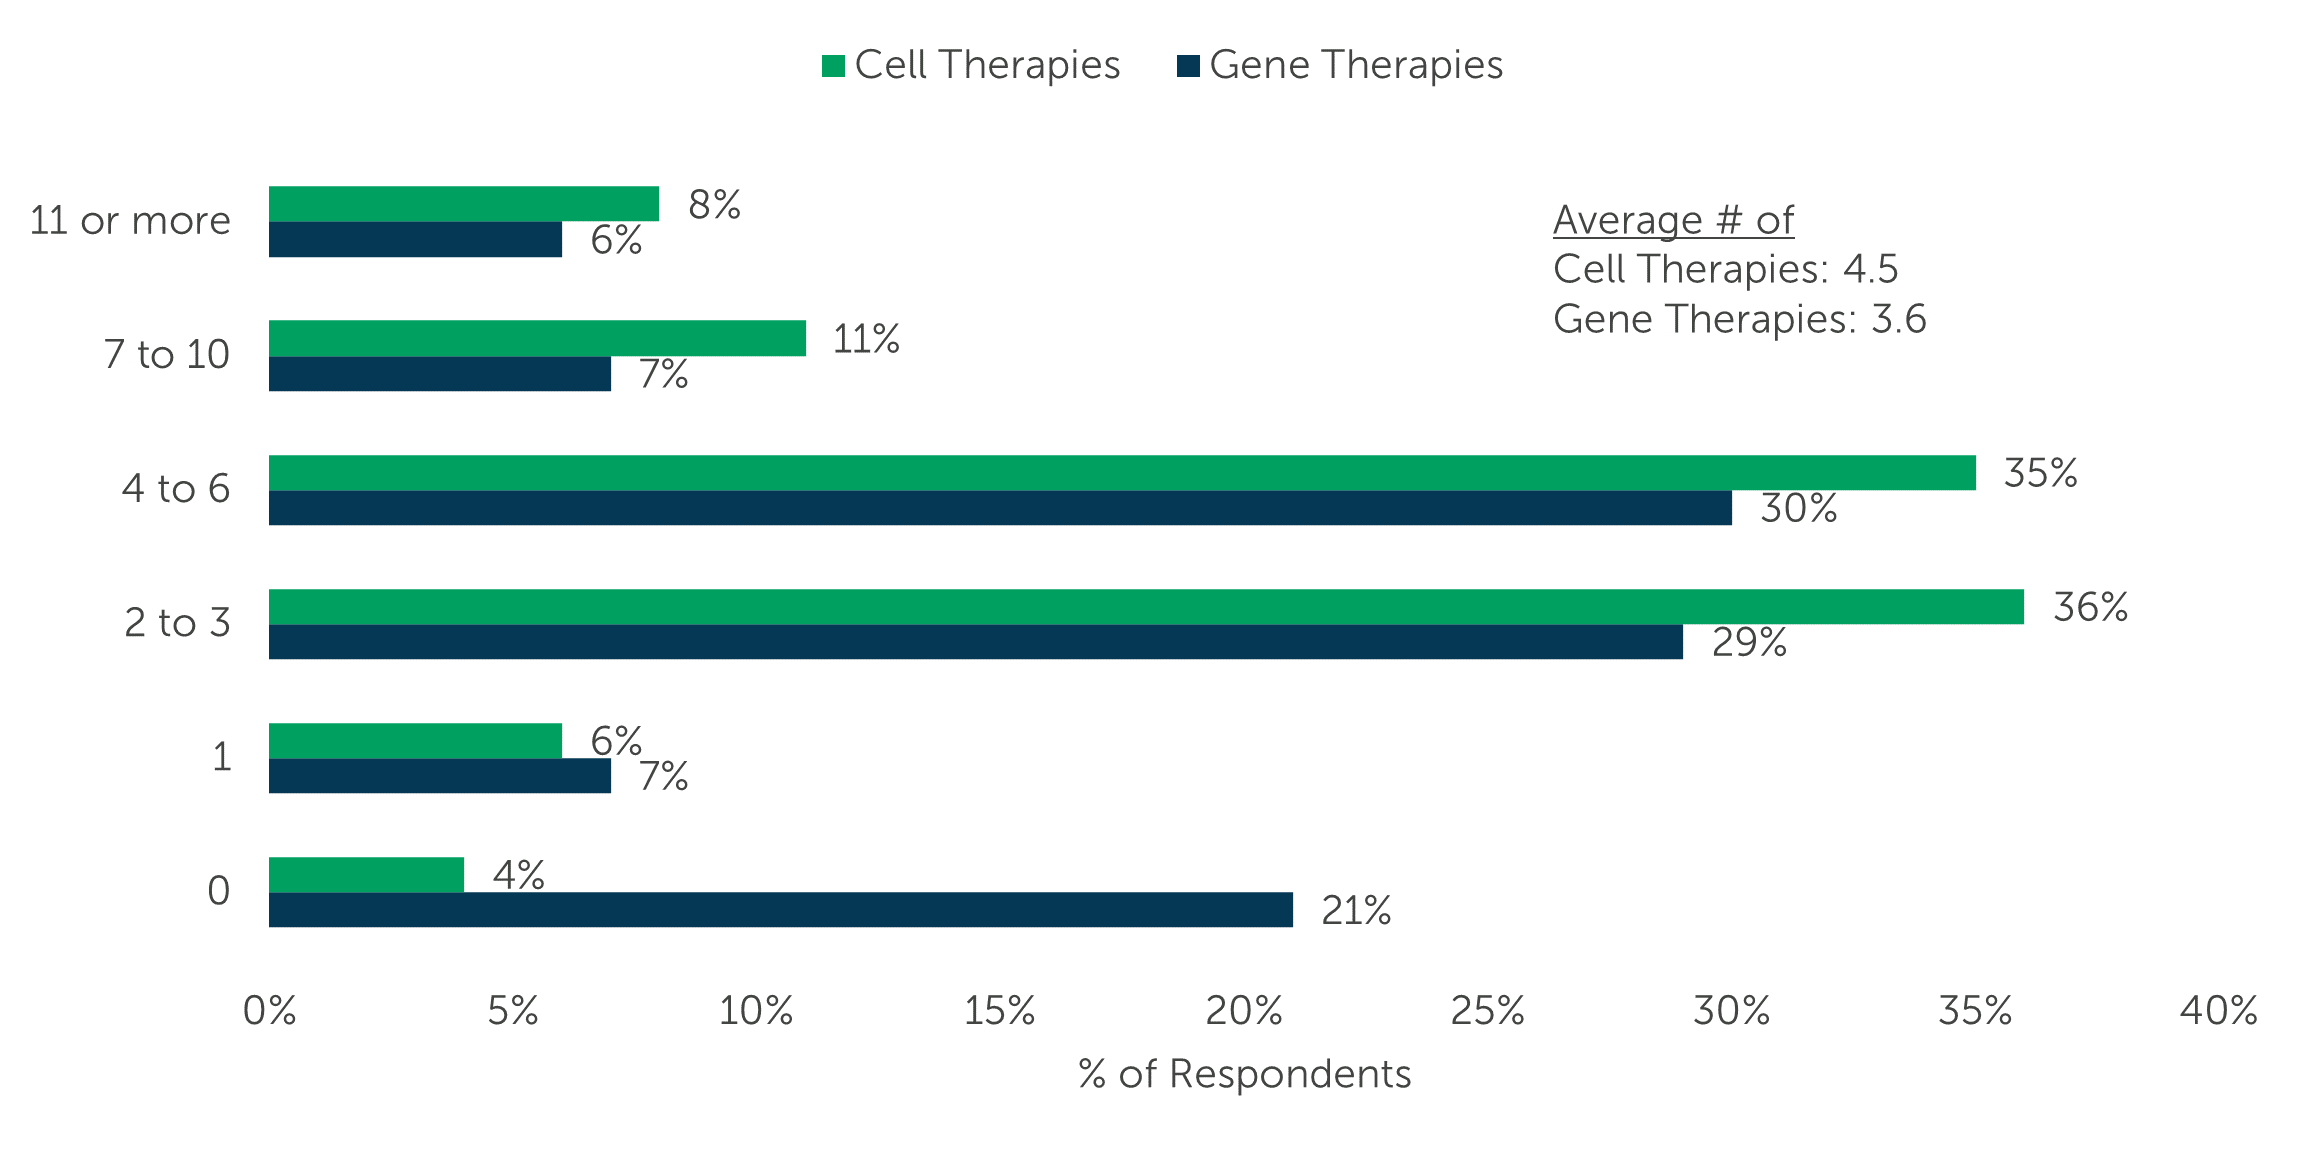 Number of Cell & Gene Therapies in Pipeline